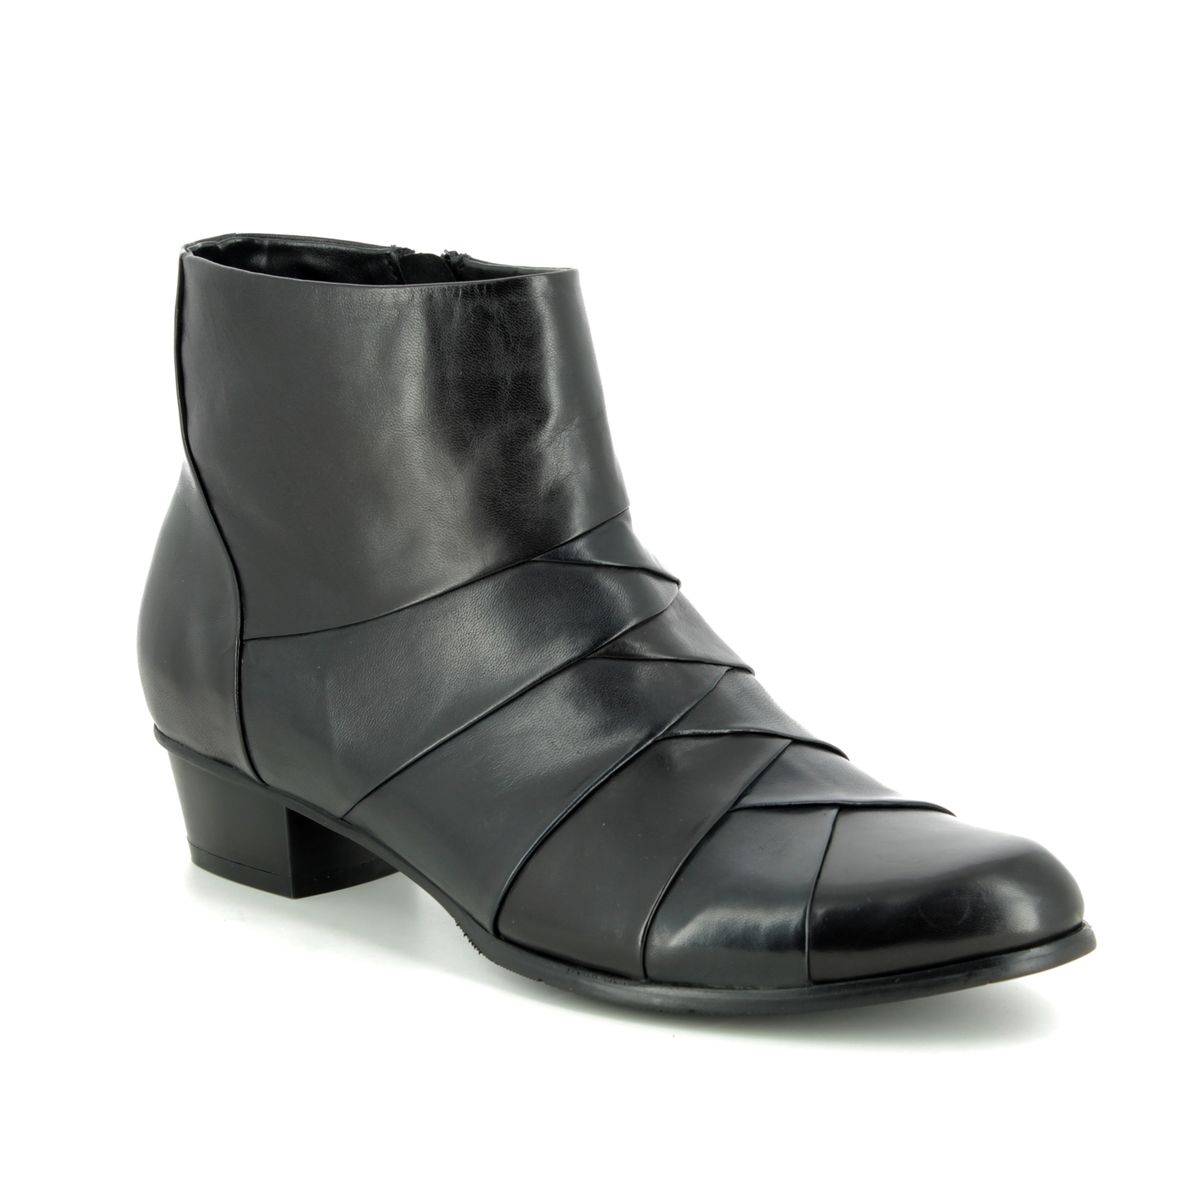 Regarde le Ciel Stefany 172 Black Navy Womens Ankle Boots 0172-0166 in a Plain Leather in Size 39